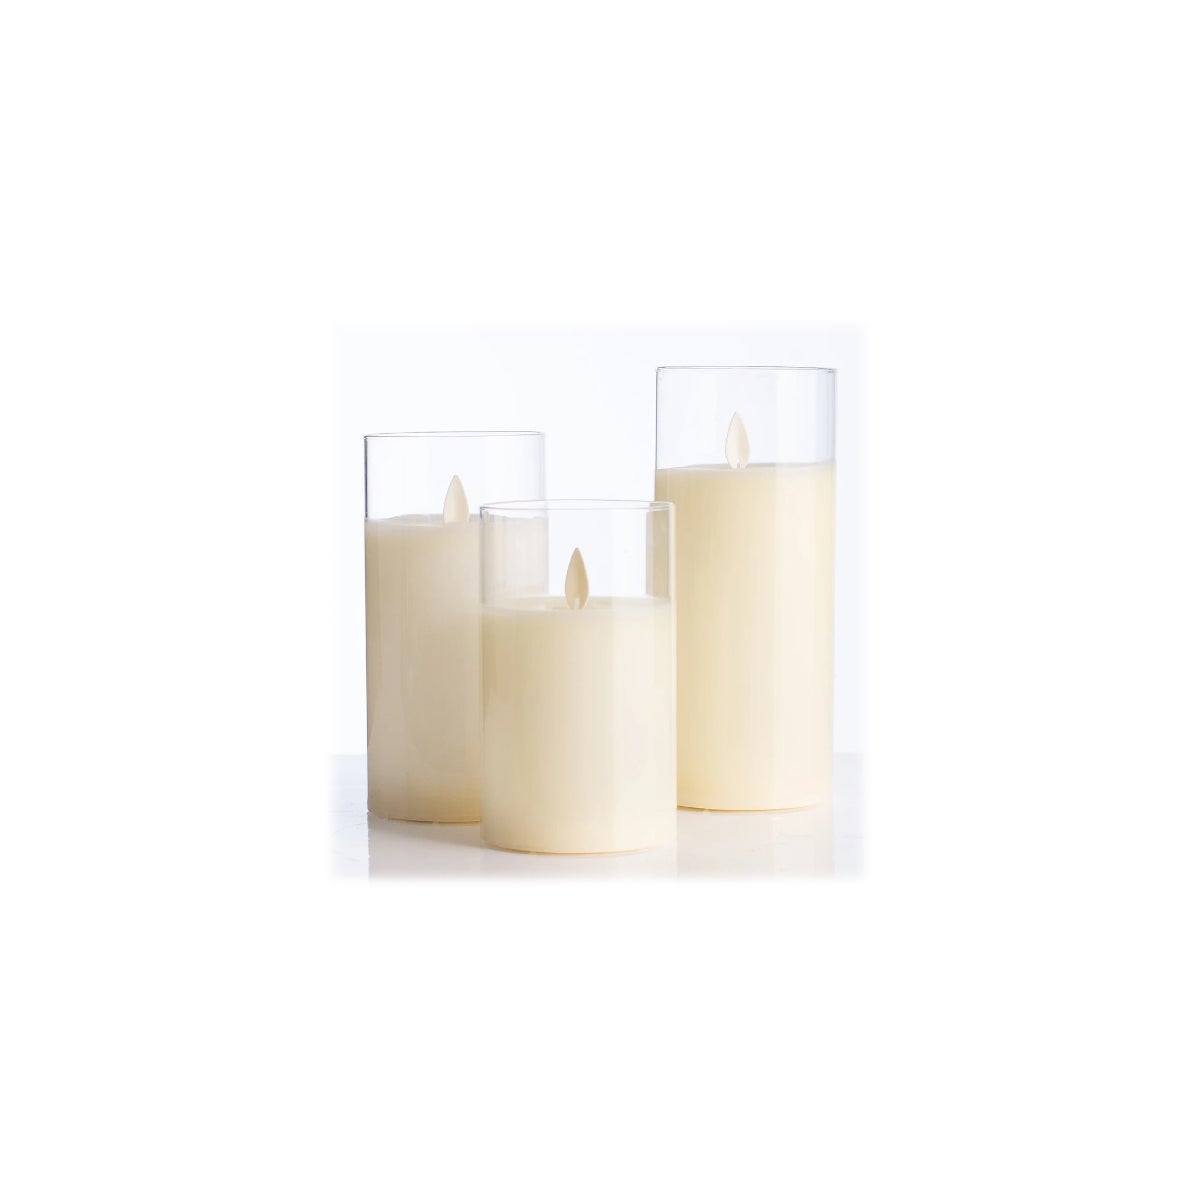 LED Candles in Clear Glass Cylinders - Set/3